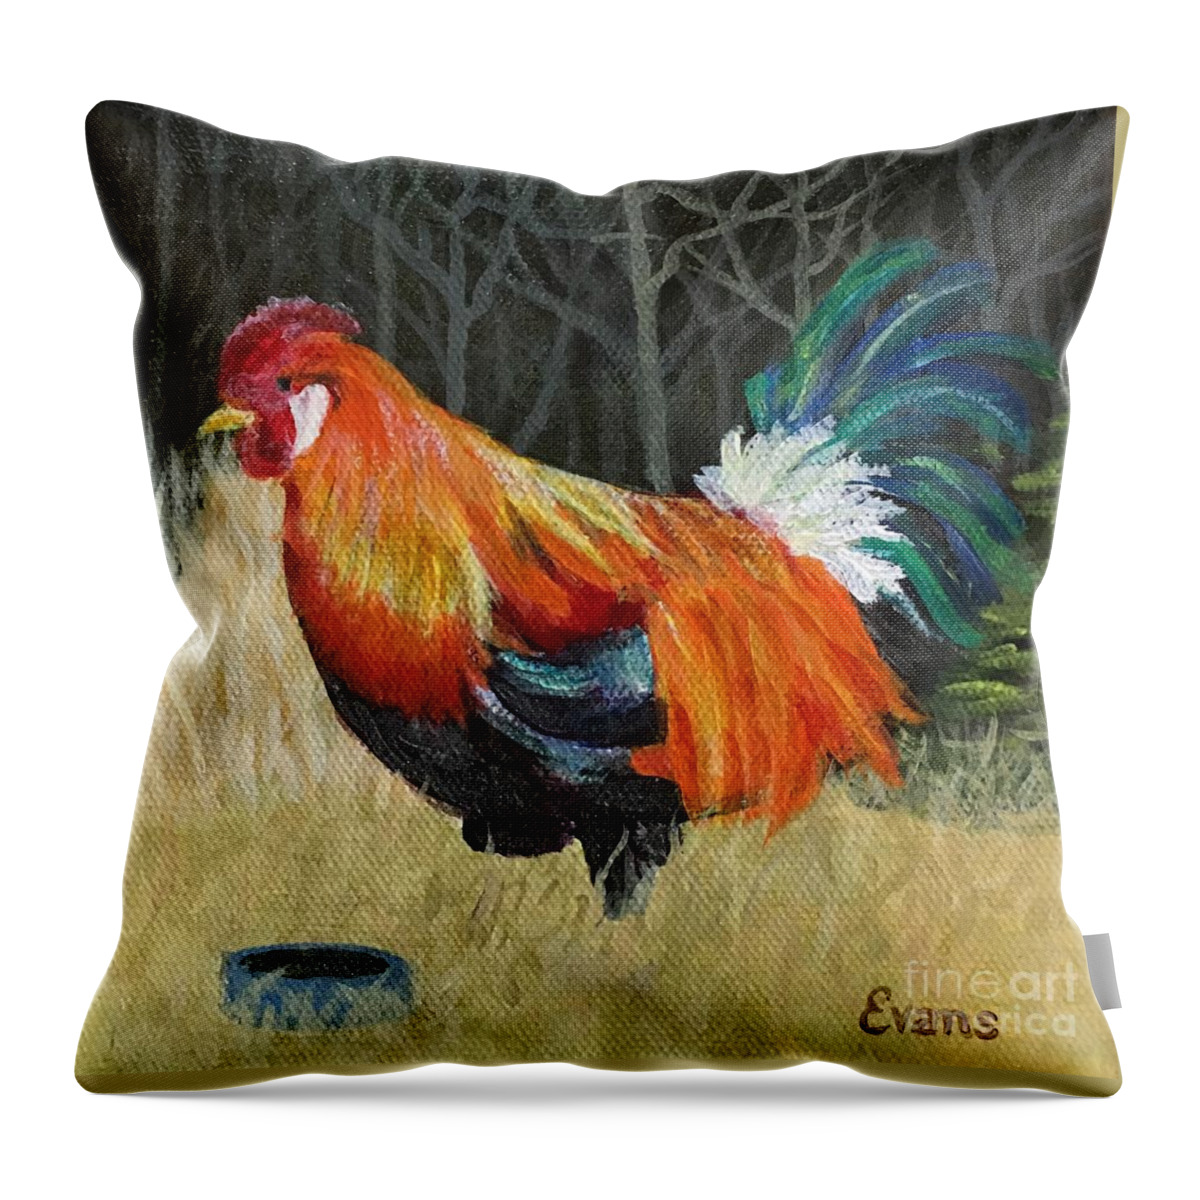 Rooster Throw Pillow featuring the painting Mr. Rainbow by Lynda Evans